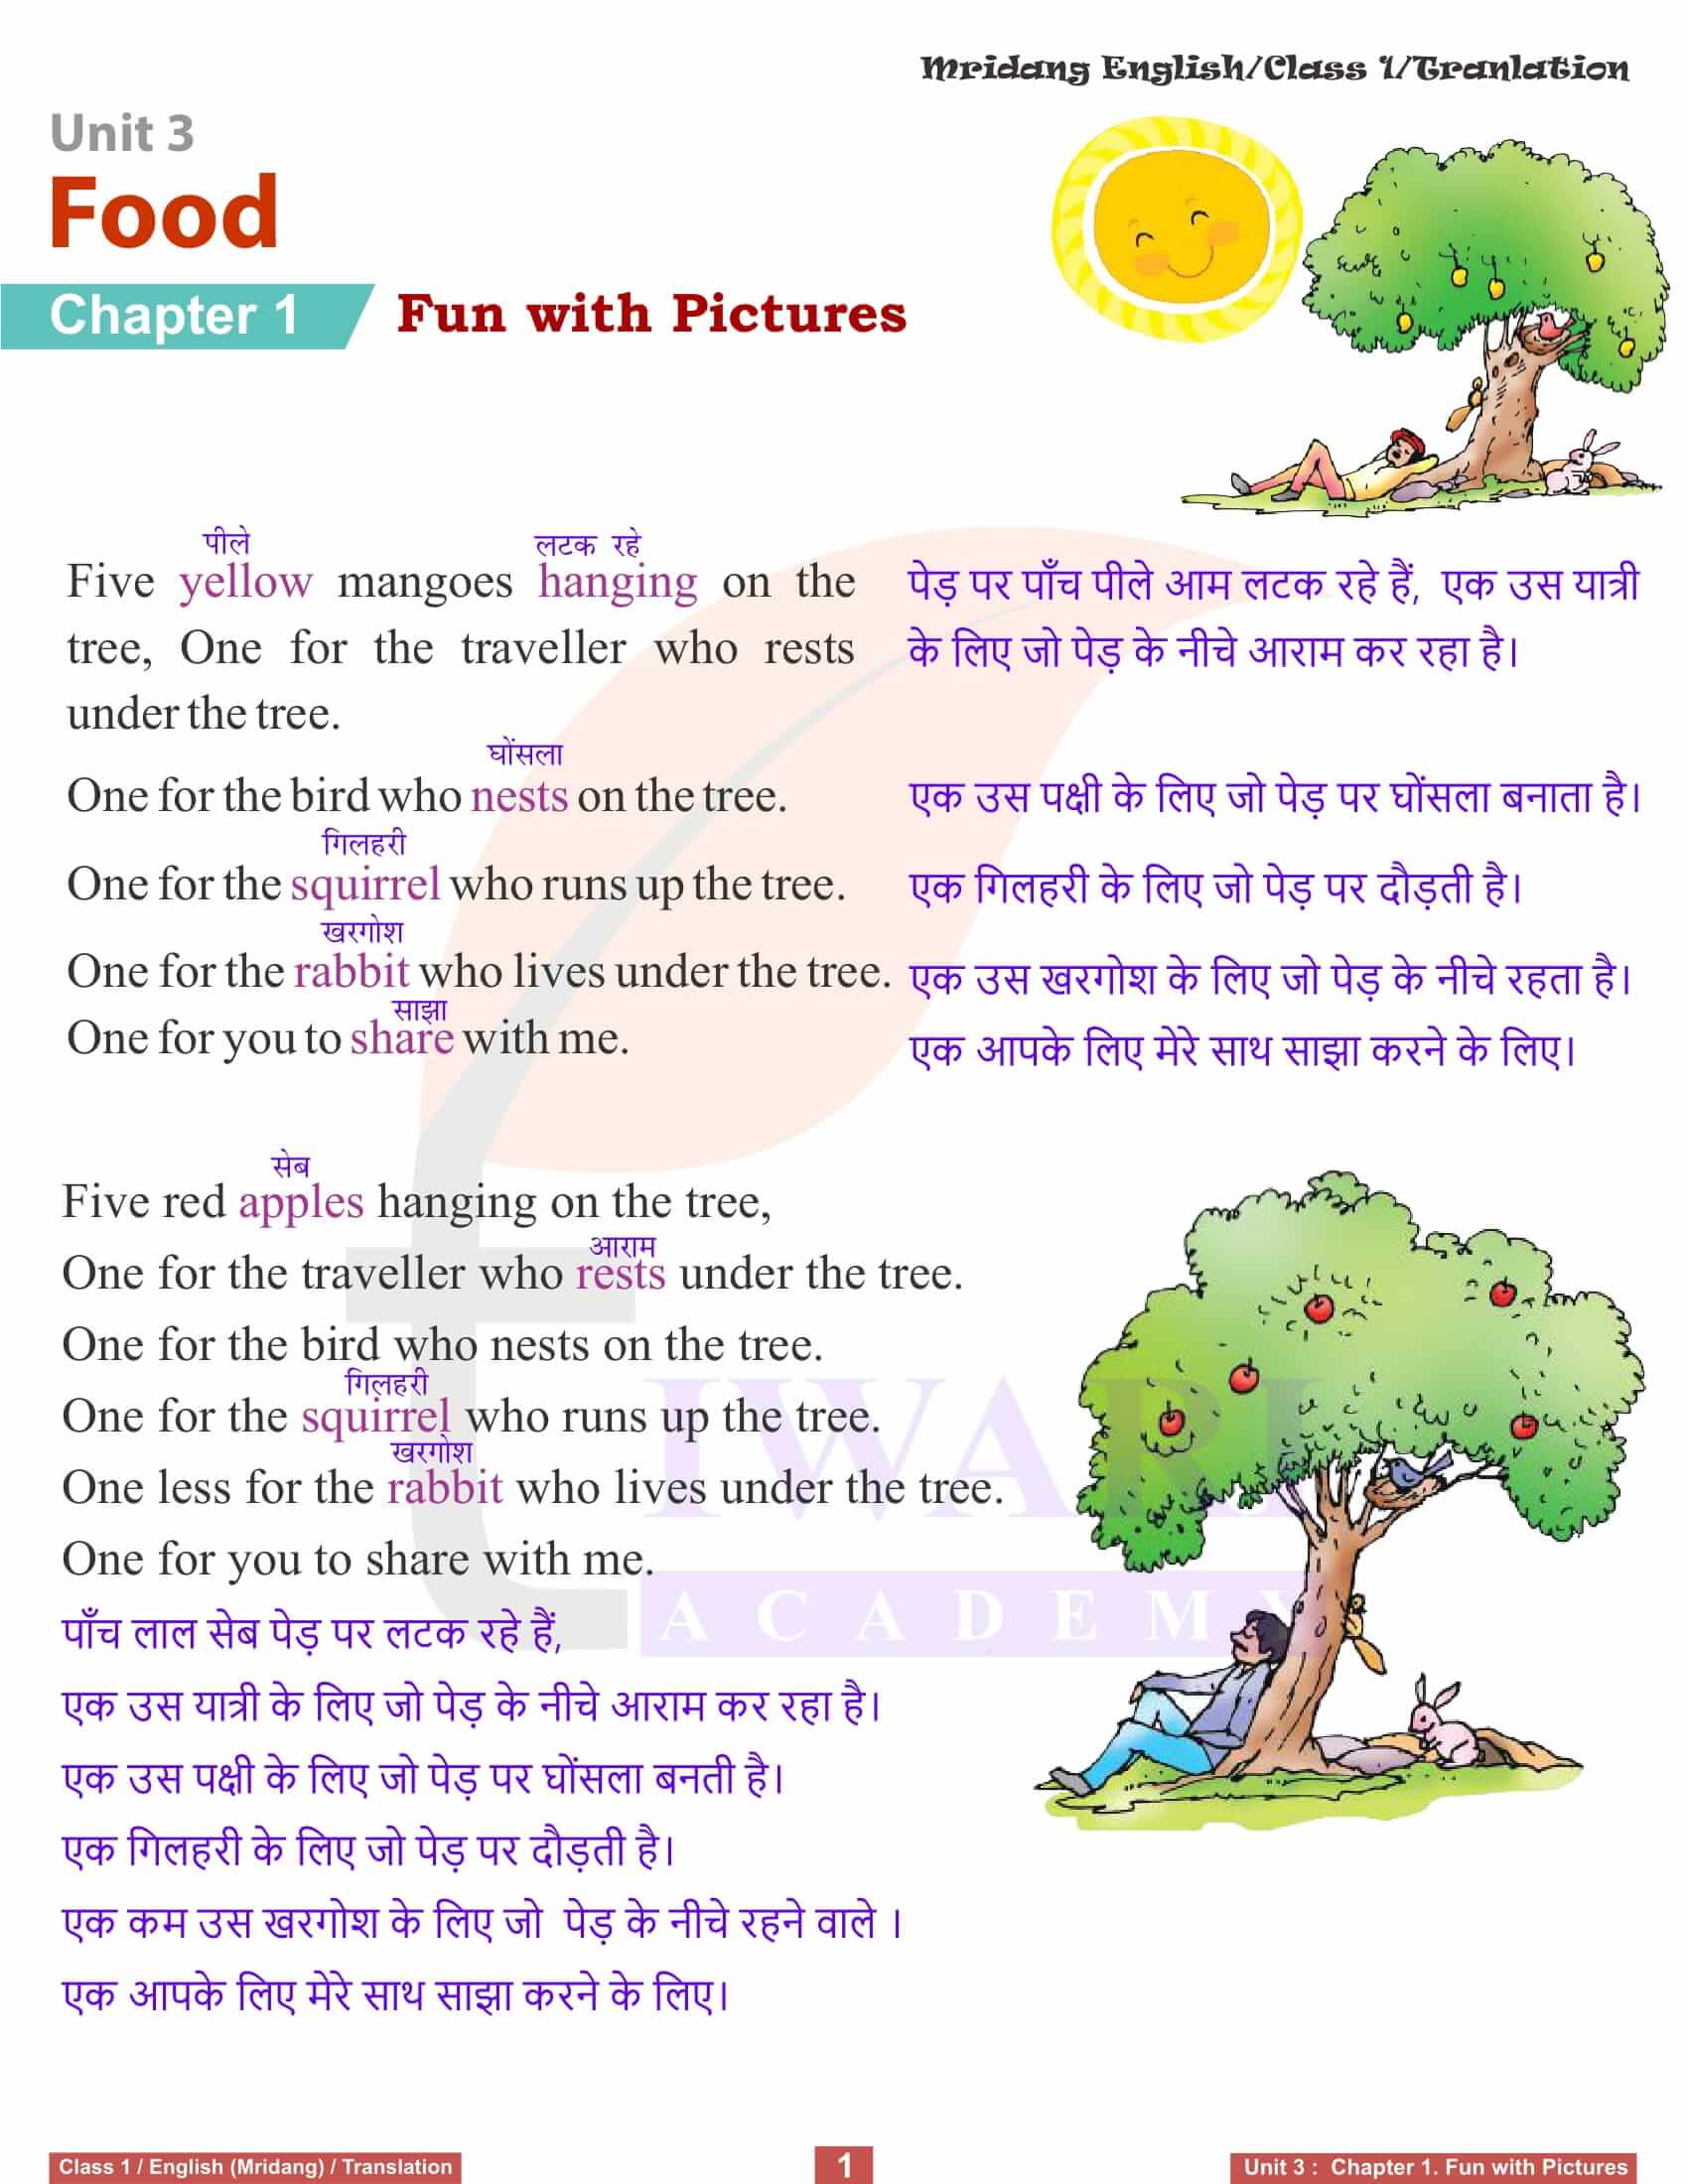 NCERT Solutions for Class 1 English Mridang Unit 3 Food Chapter 1 Fun with Pictures Translation